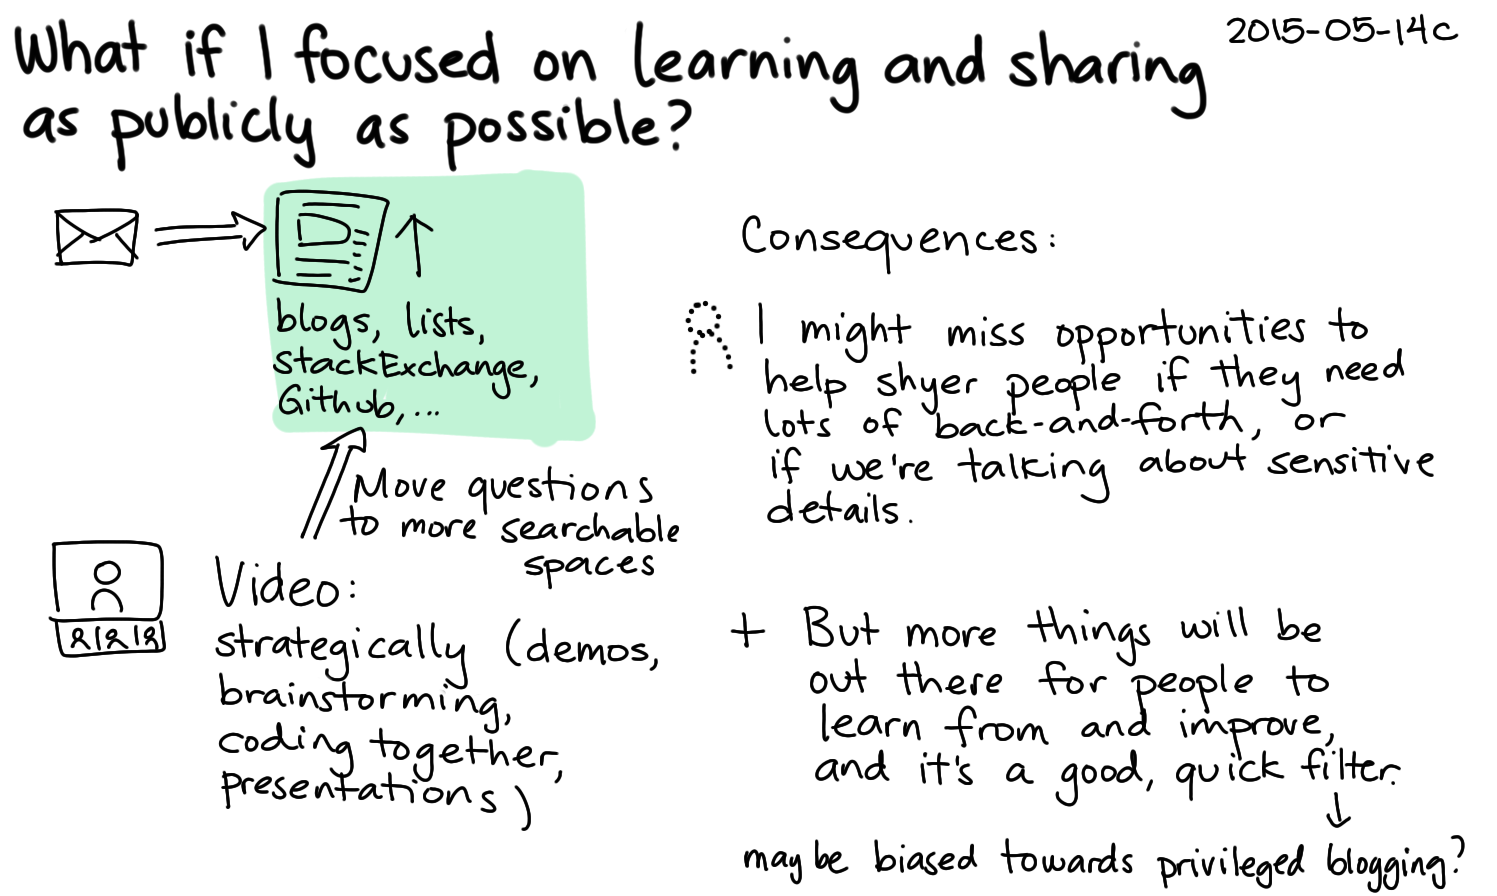 2015-05-14c What if I focused on learning and sharing as publicly as possible -- index card #sharing.png